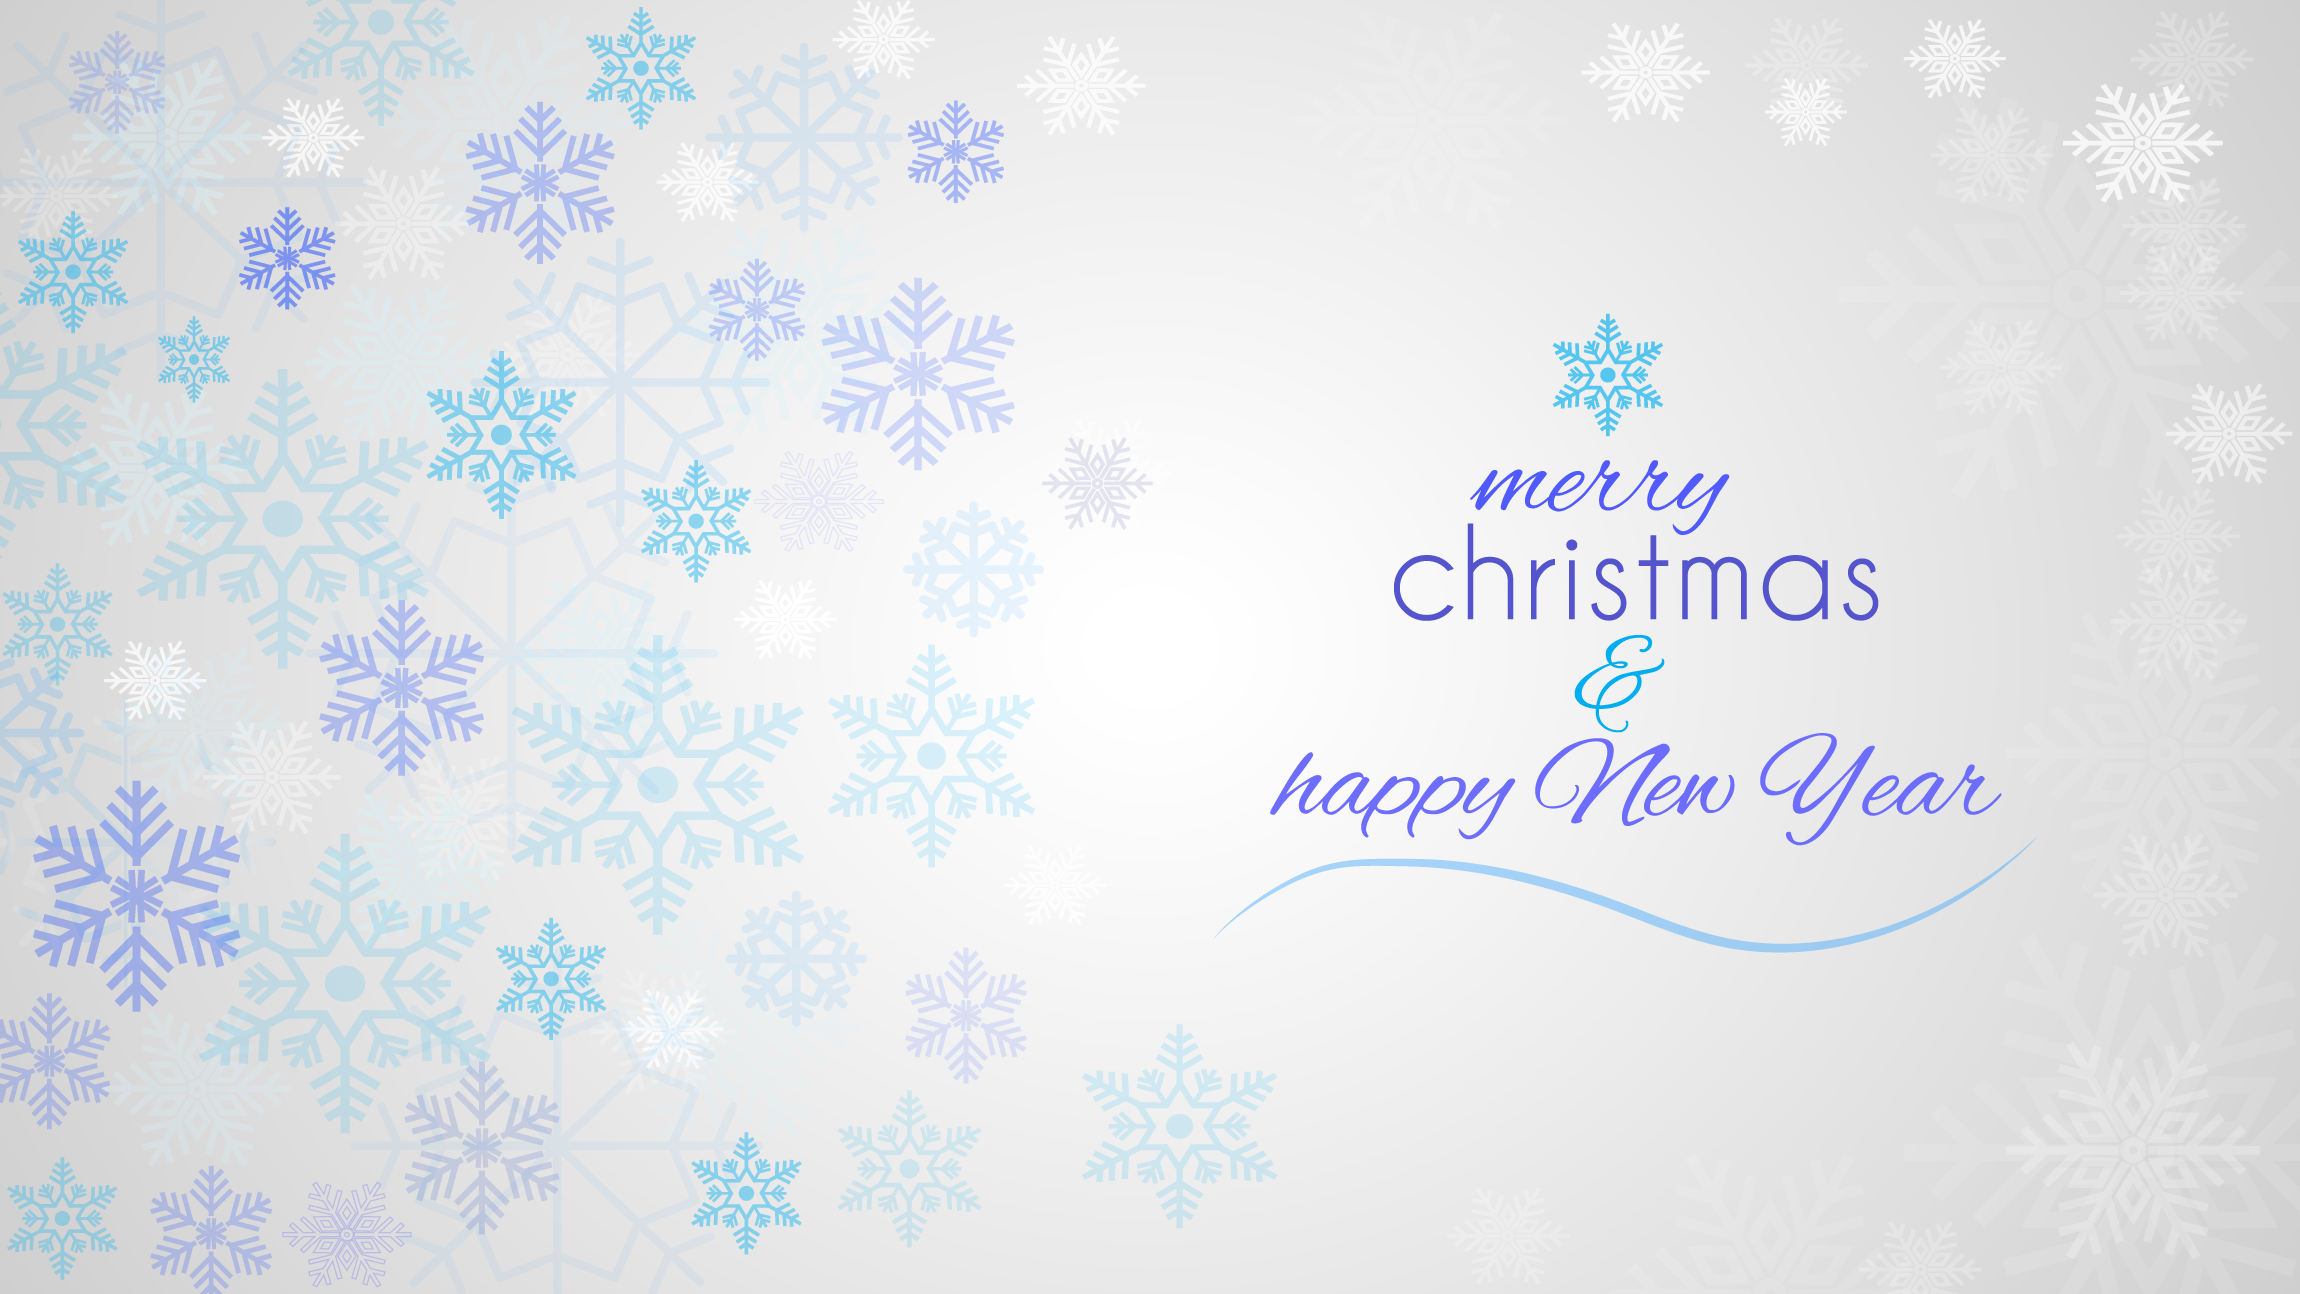 Merry Christmas and Happy New Year Wallpaper Free Merry Christmas and Happy New Year Background